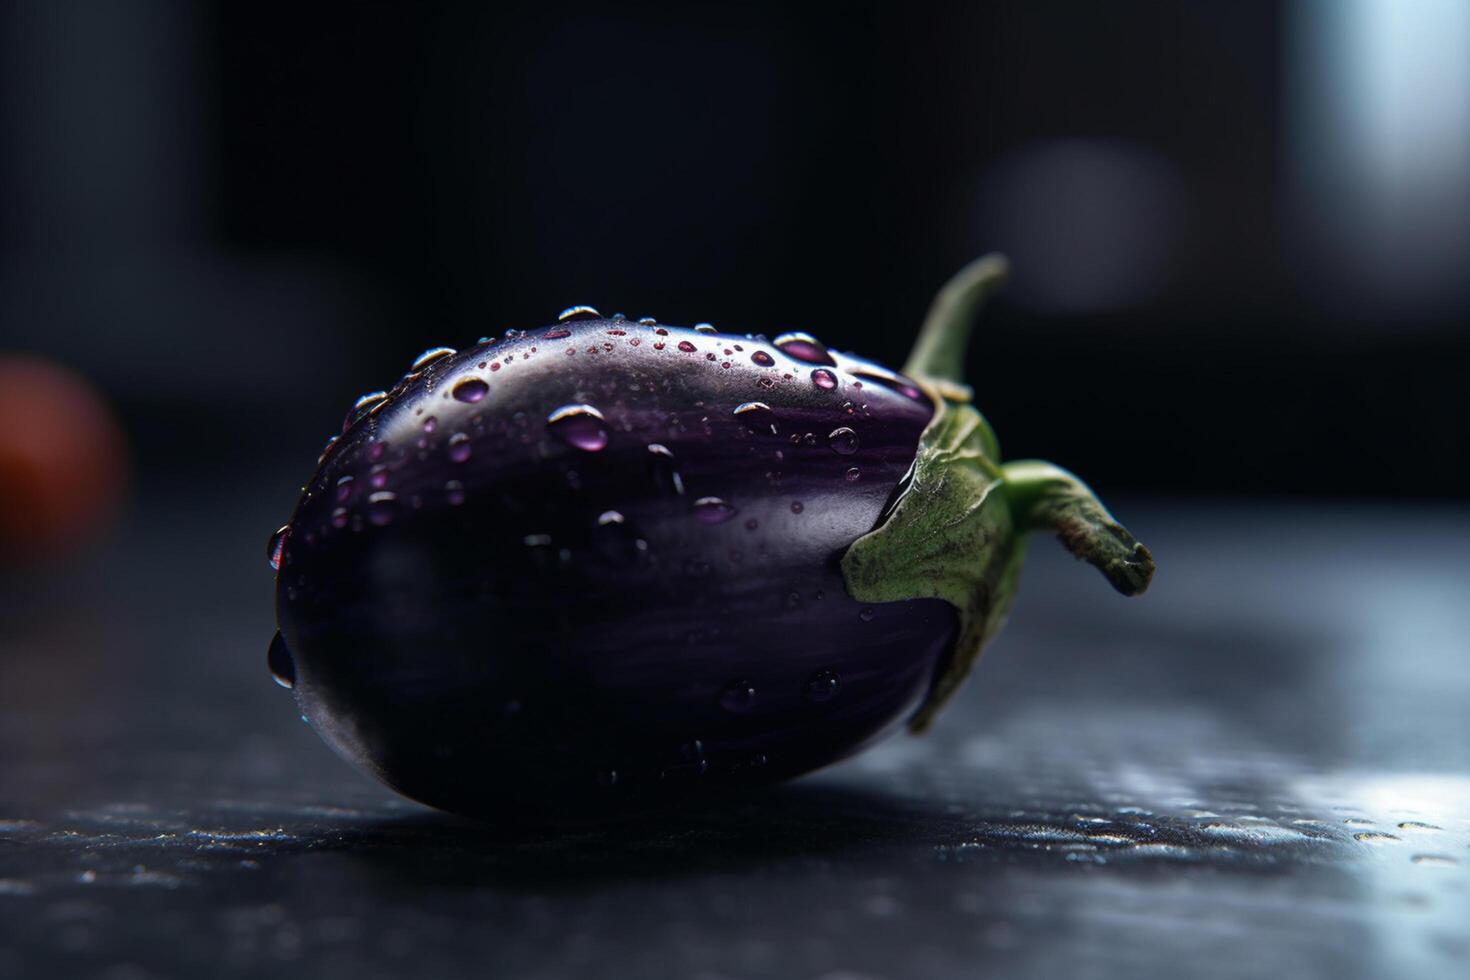 Artificial UV light cultivation of an eggplant photo